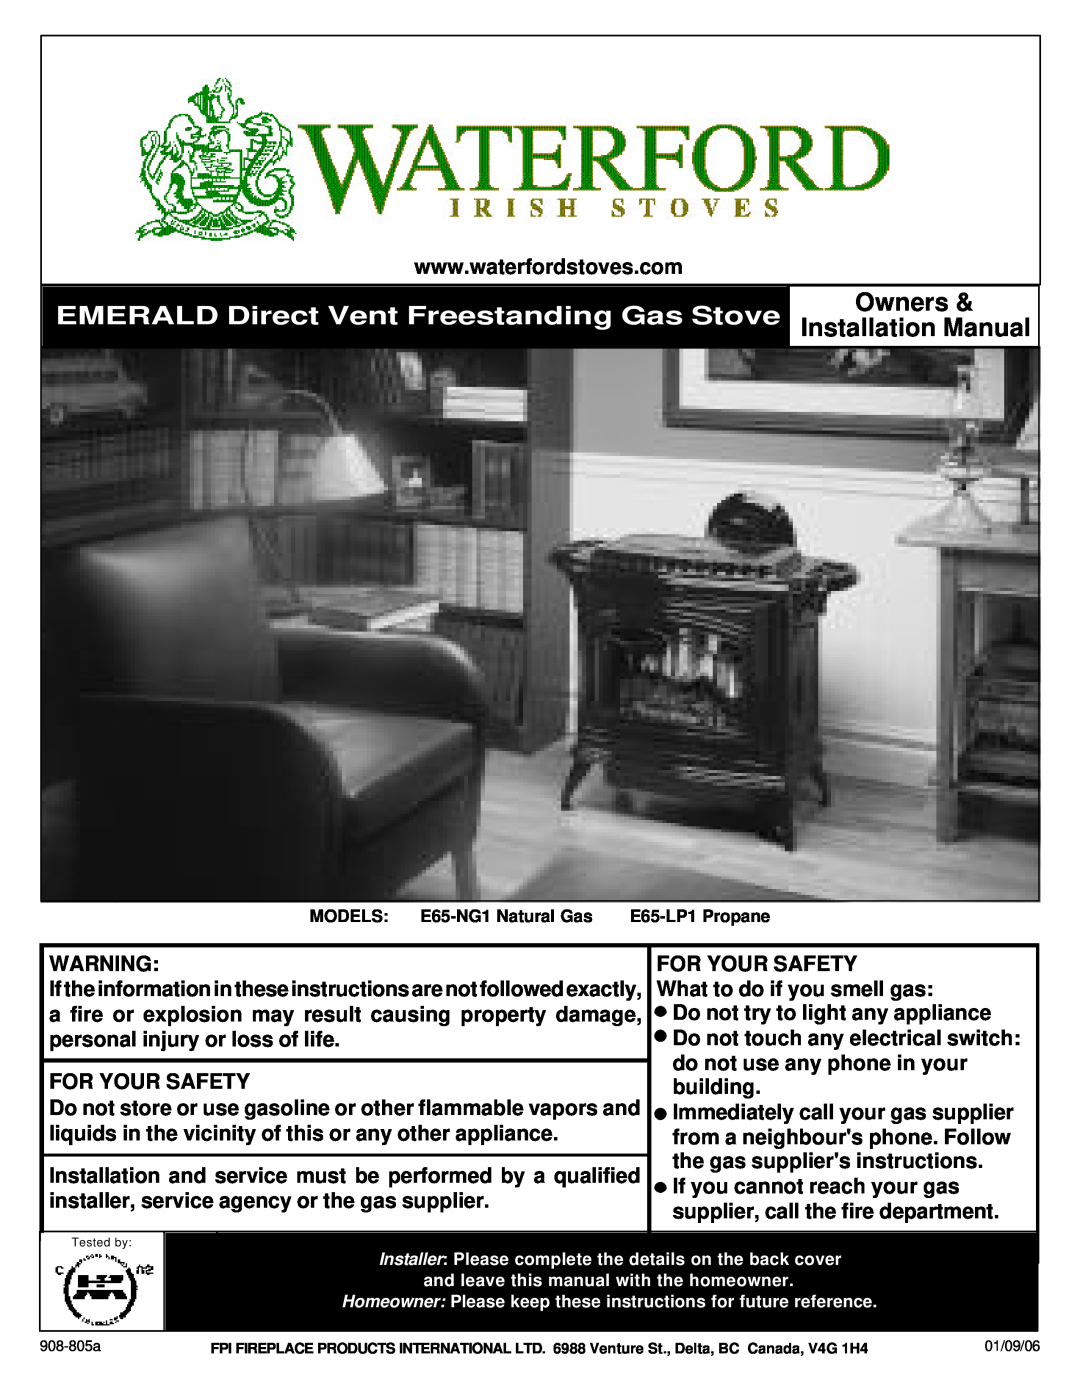 Waterford Appliances E65-LP1 installation manual EMERALD Direct Vent Freestanding Gas Stove, Owners & Installation Manual 